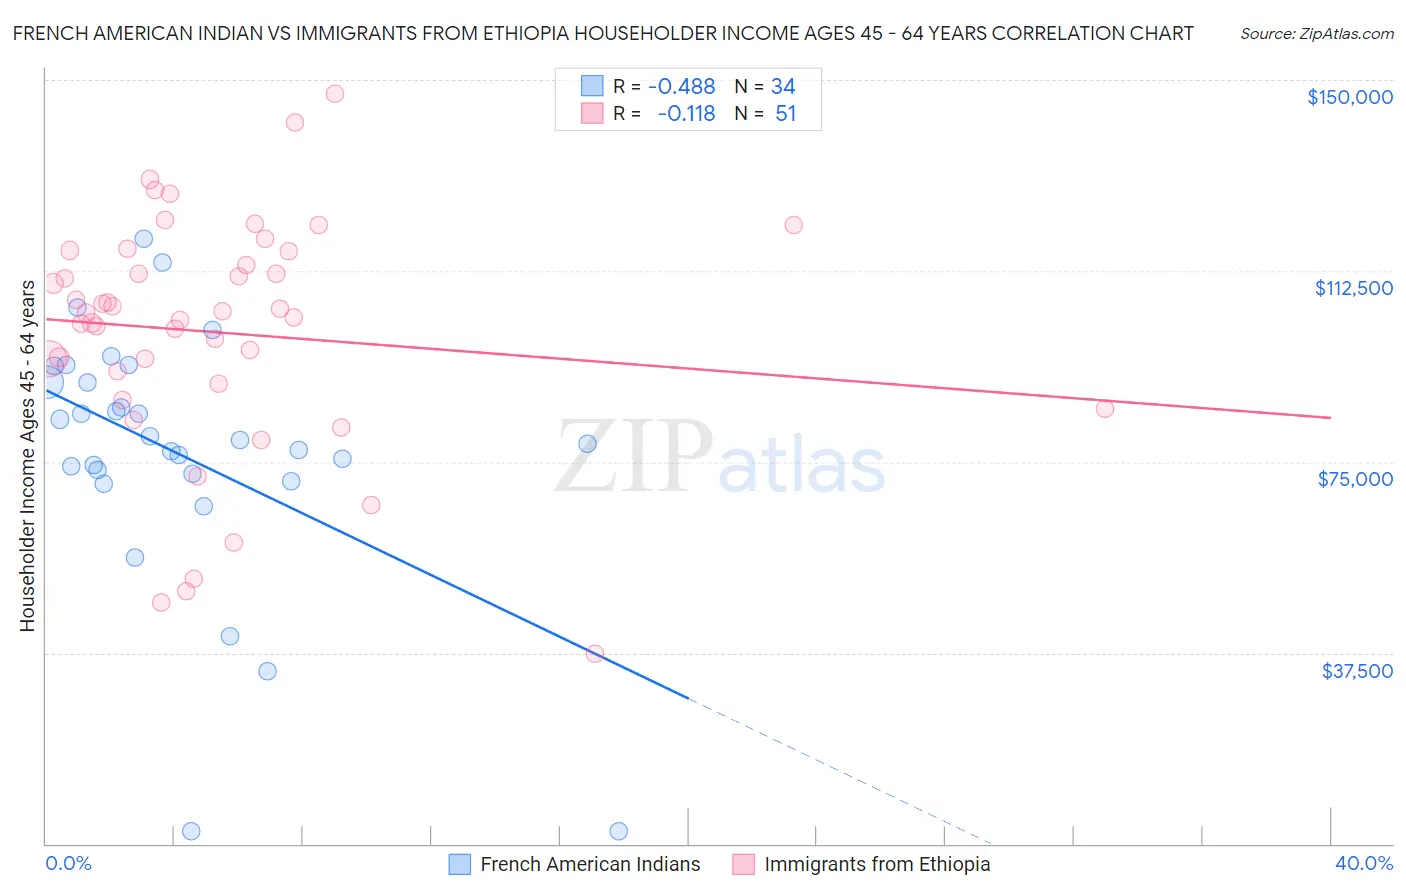 French American Indian vs Immigrants from Ethiopia Householder Income Ages 45 - 64 years